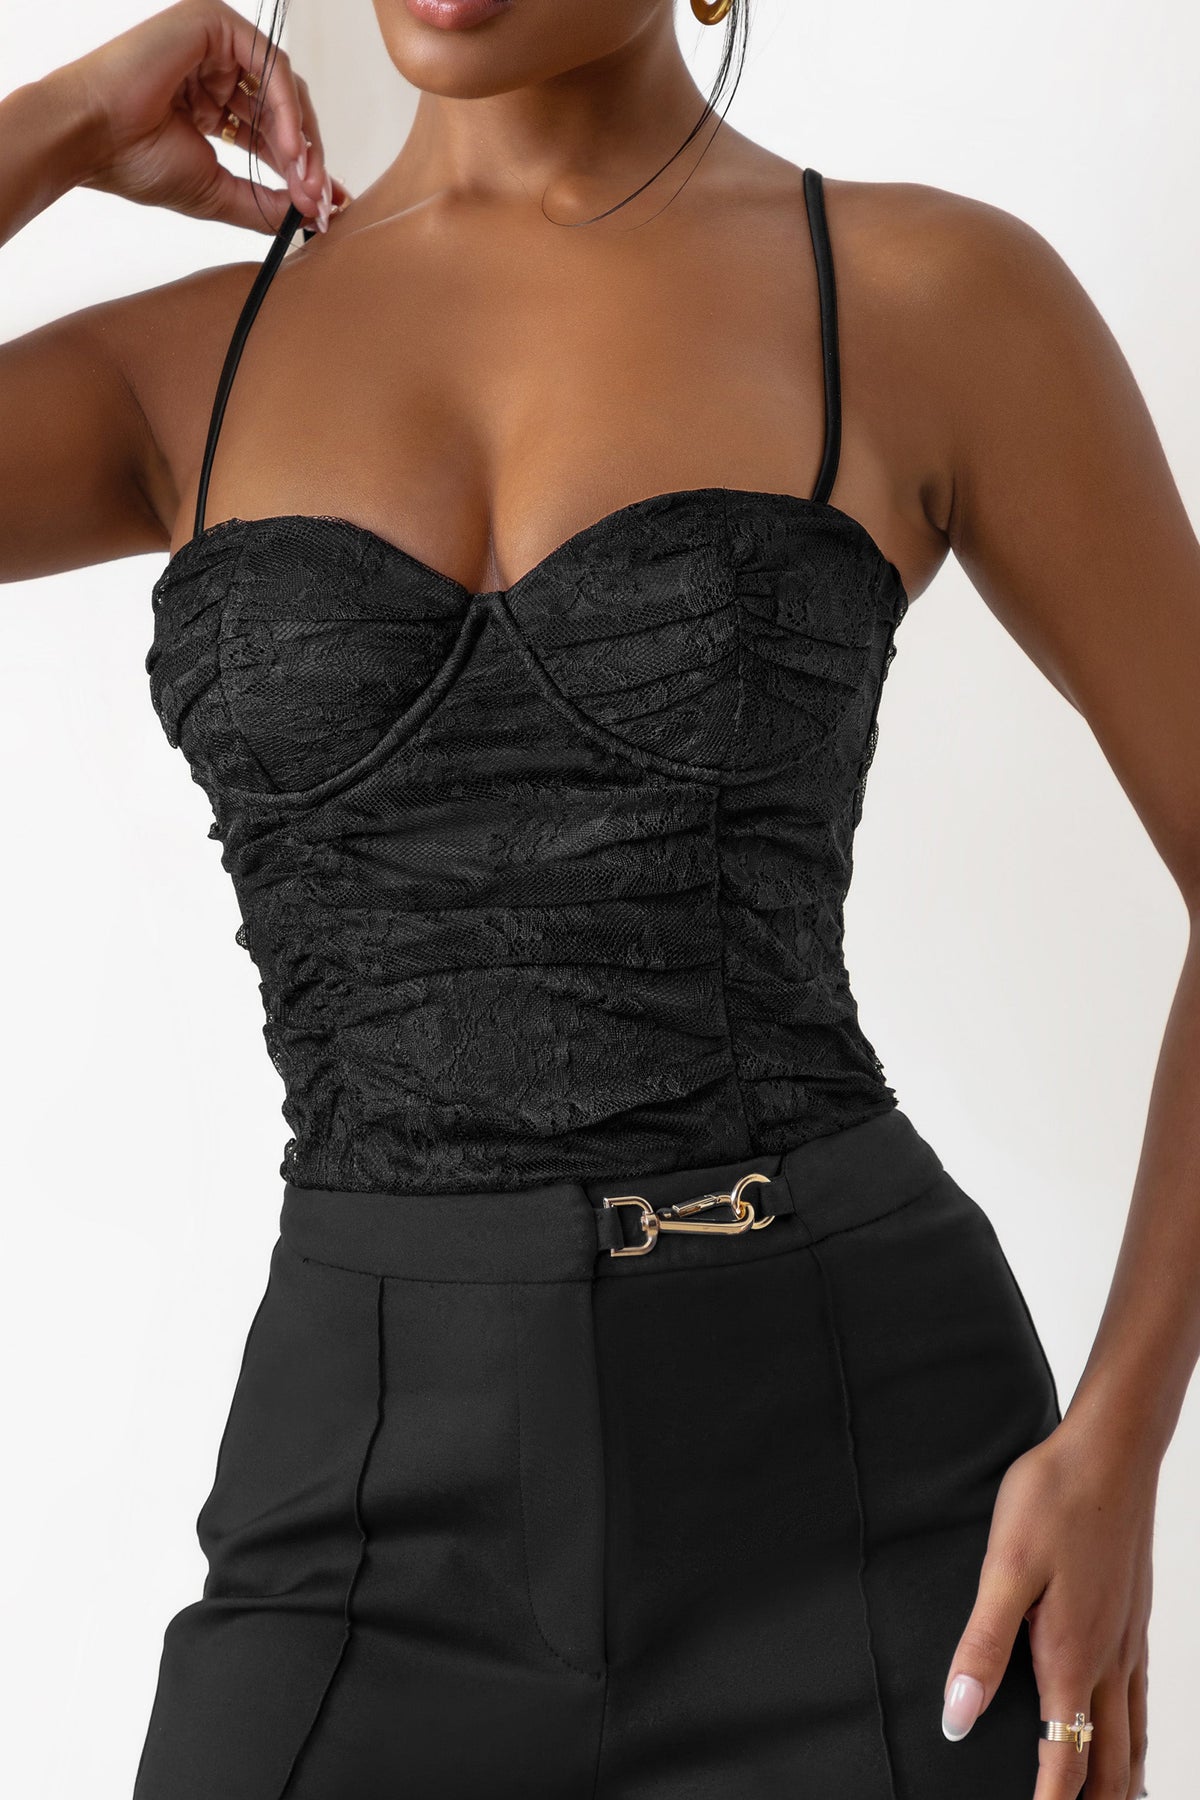 Tallula Black Lace Ruched Mesh Top With Bra Cup Detail – Club L London - USA